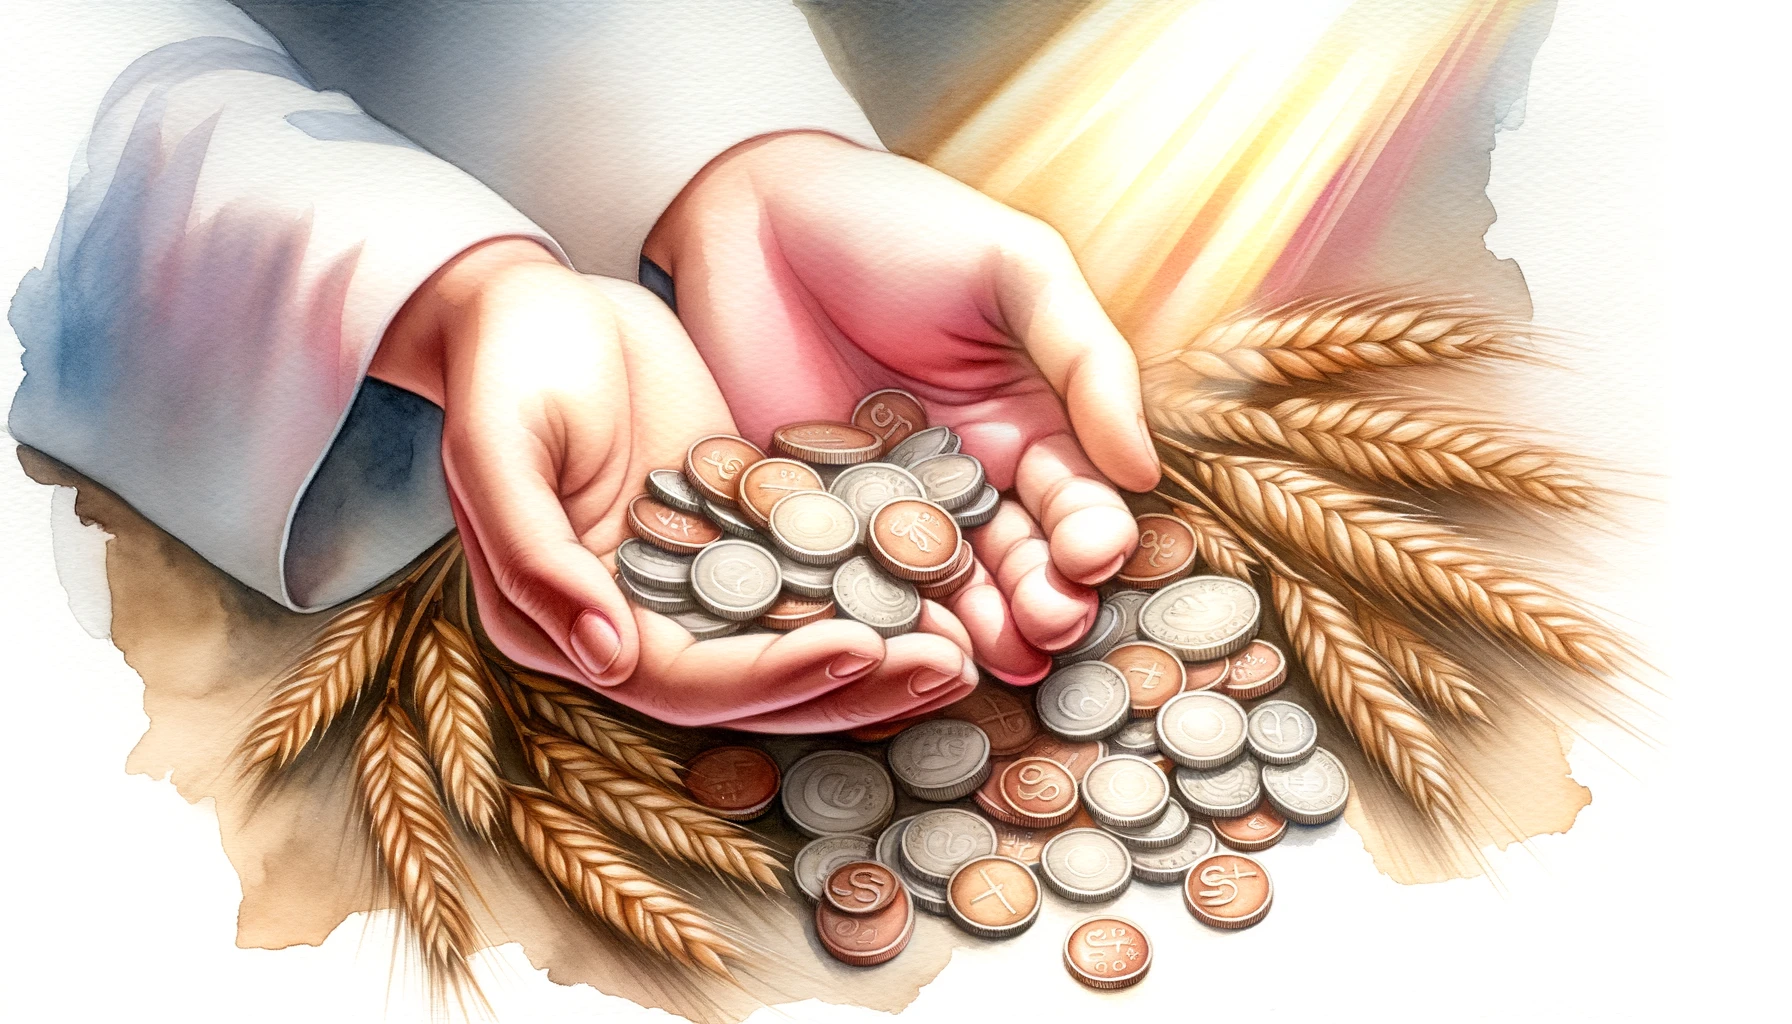 Hands generously offering coins and grains, with a soft divine light illuminating the scene, symbolizing the act of tithing and the blessings it brings.